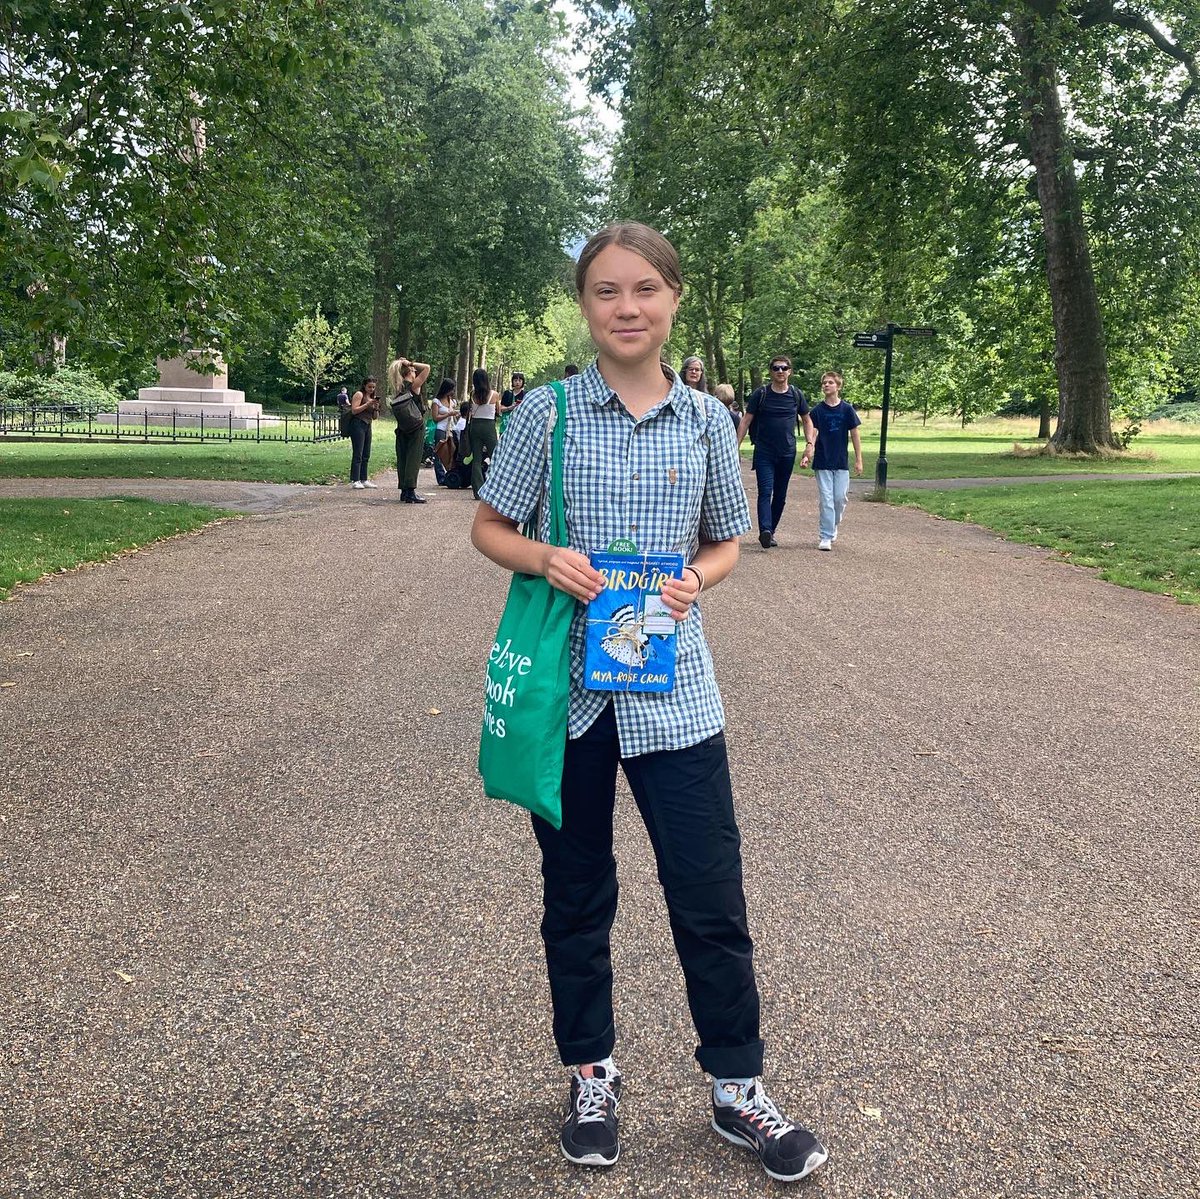 The Book Fairies have been joined by a team of climate activists in London today! Who will be lucky enough to spot the books that were shared? @GretaThunberg @toritsui #IBelieveInBookFairies #GreenBookFairies #COPBookFairies